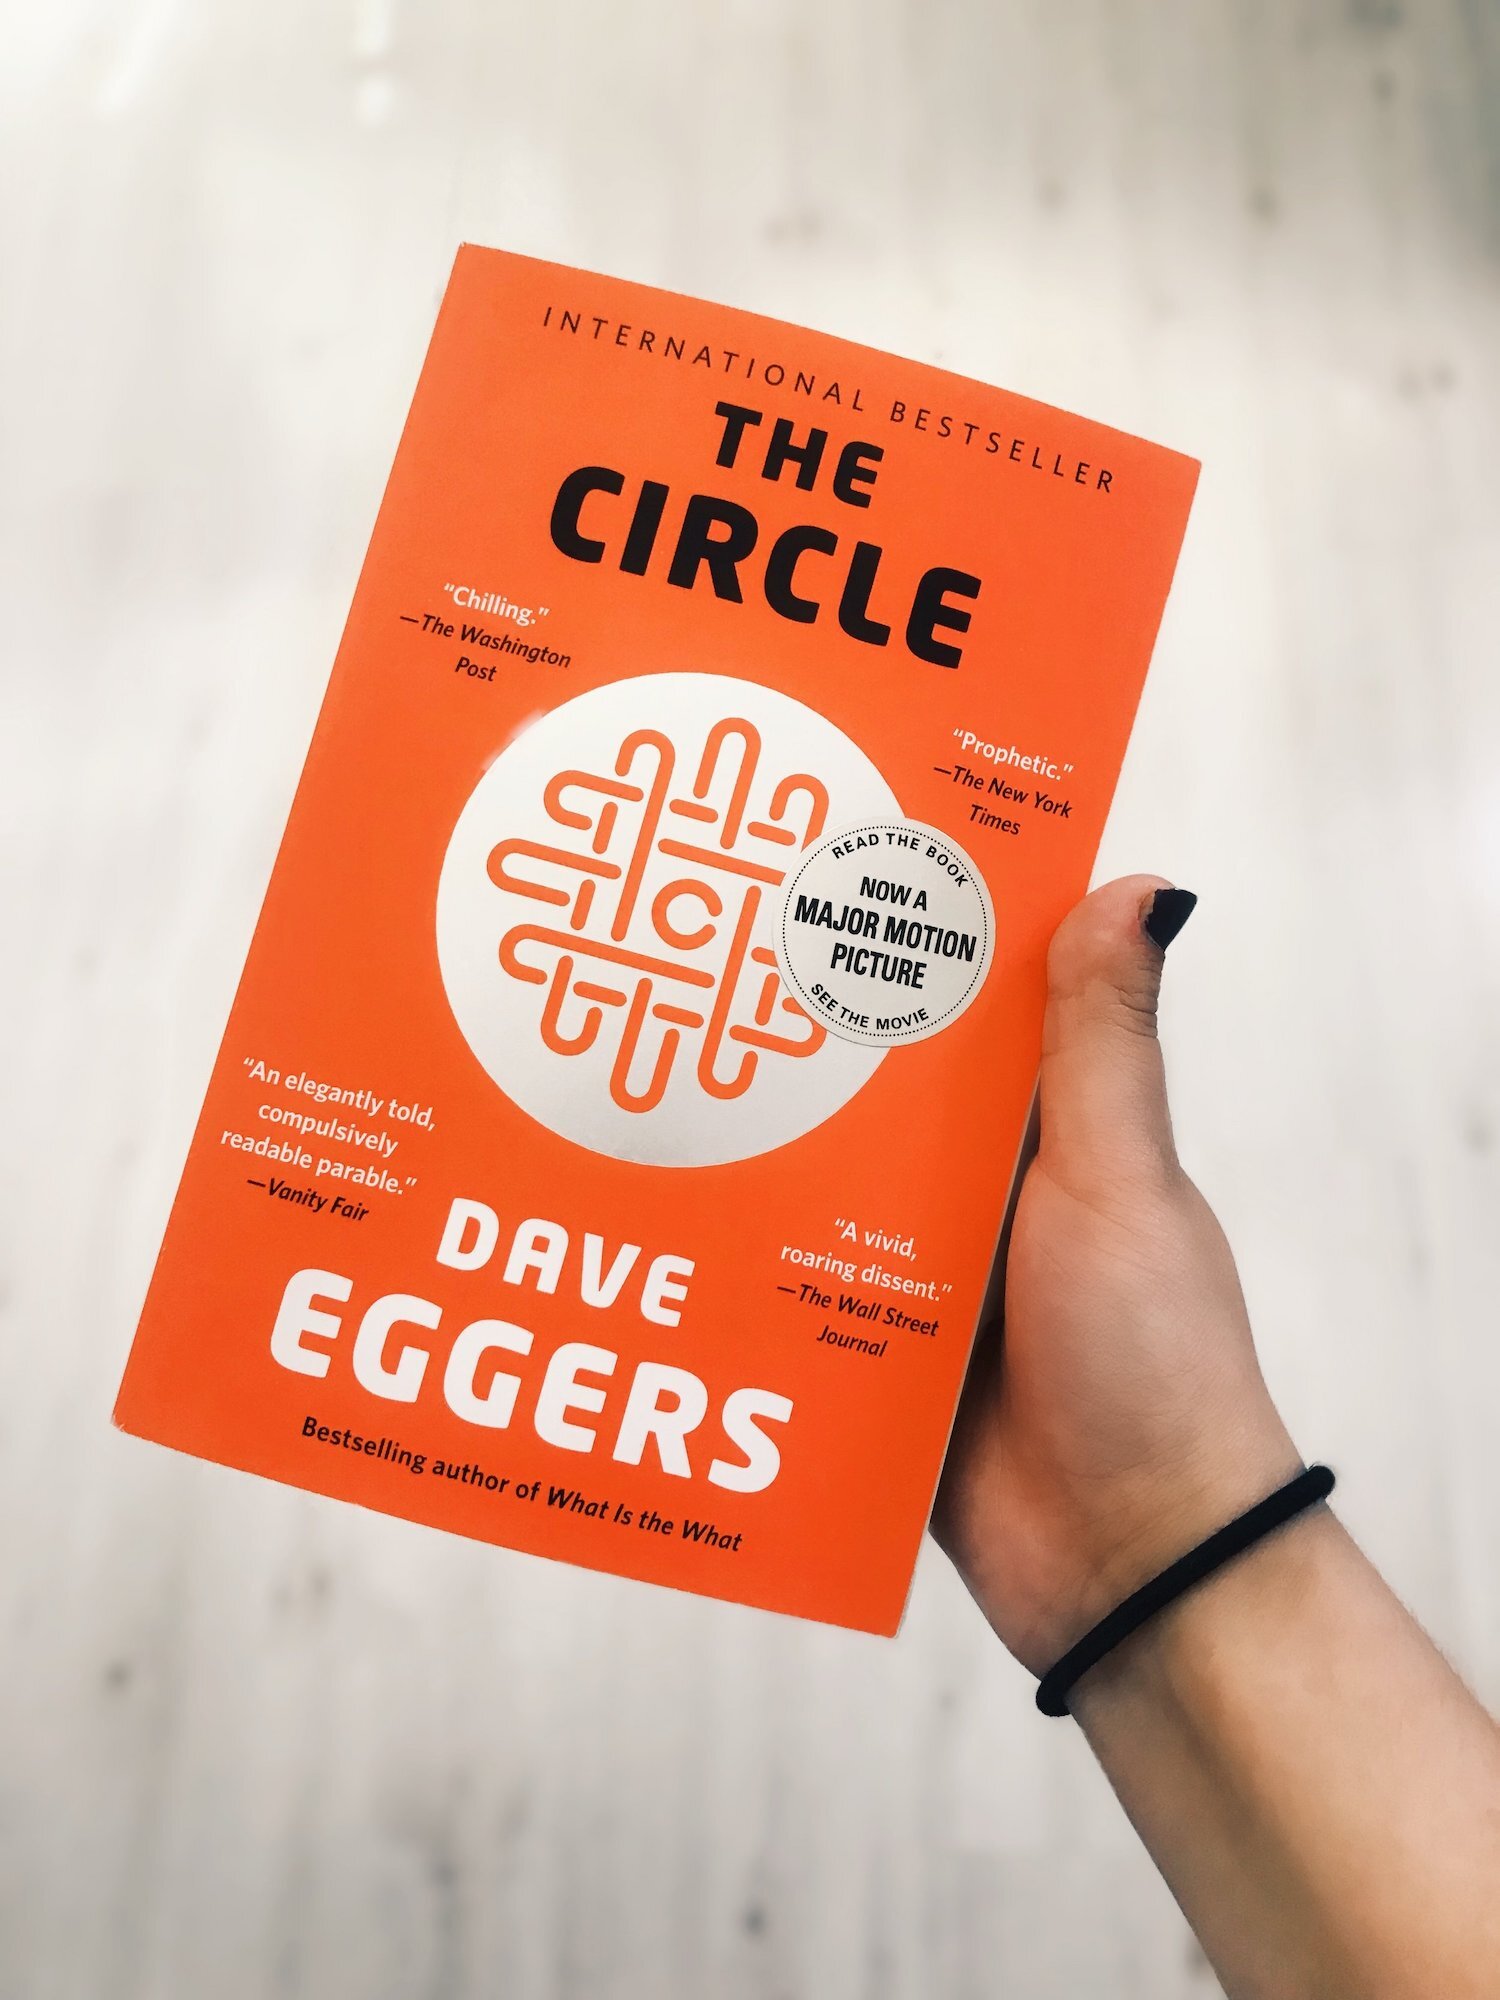 A copy of The Circle by Dave Eggers held in a hand.